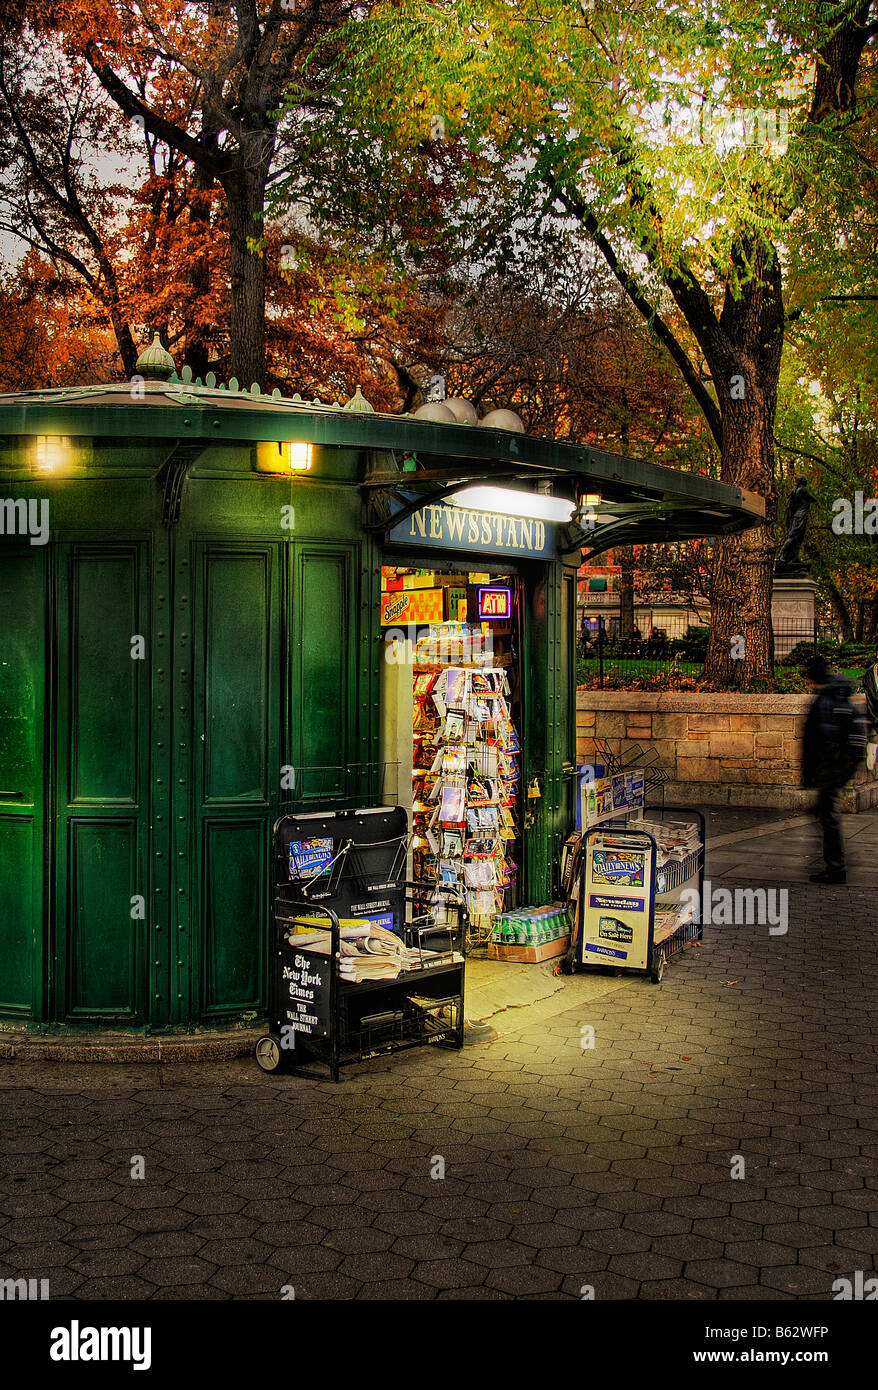 Newsstand lit up at night Stock Photo